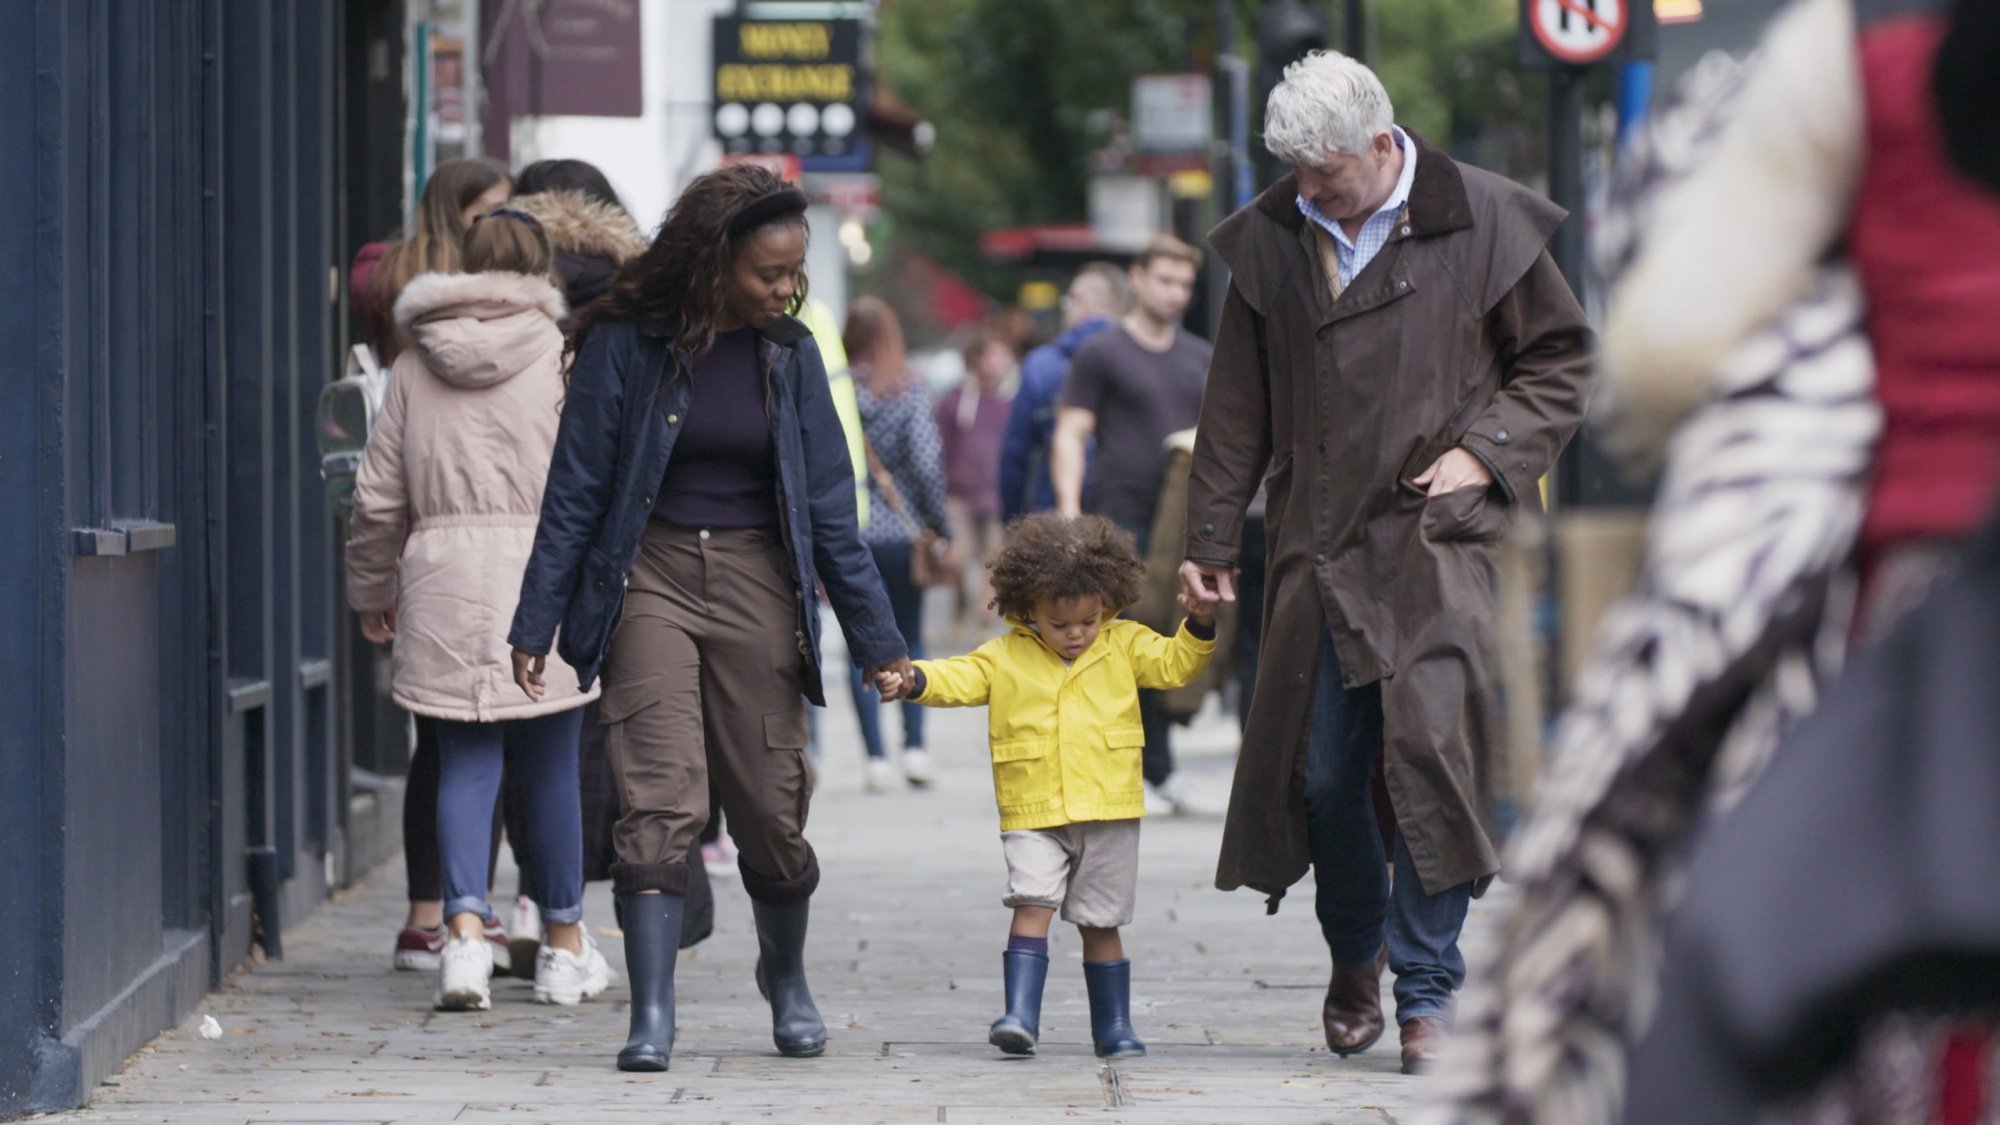 A man and woman hold the hands of a small child walking between them on the street. The child is wearing a yellow raincoat.